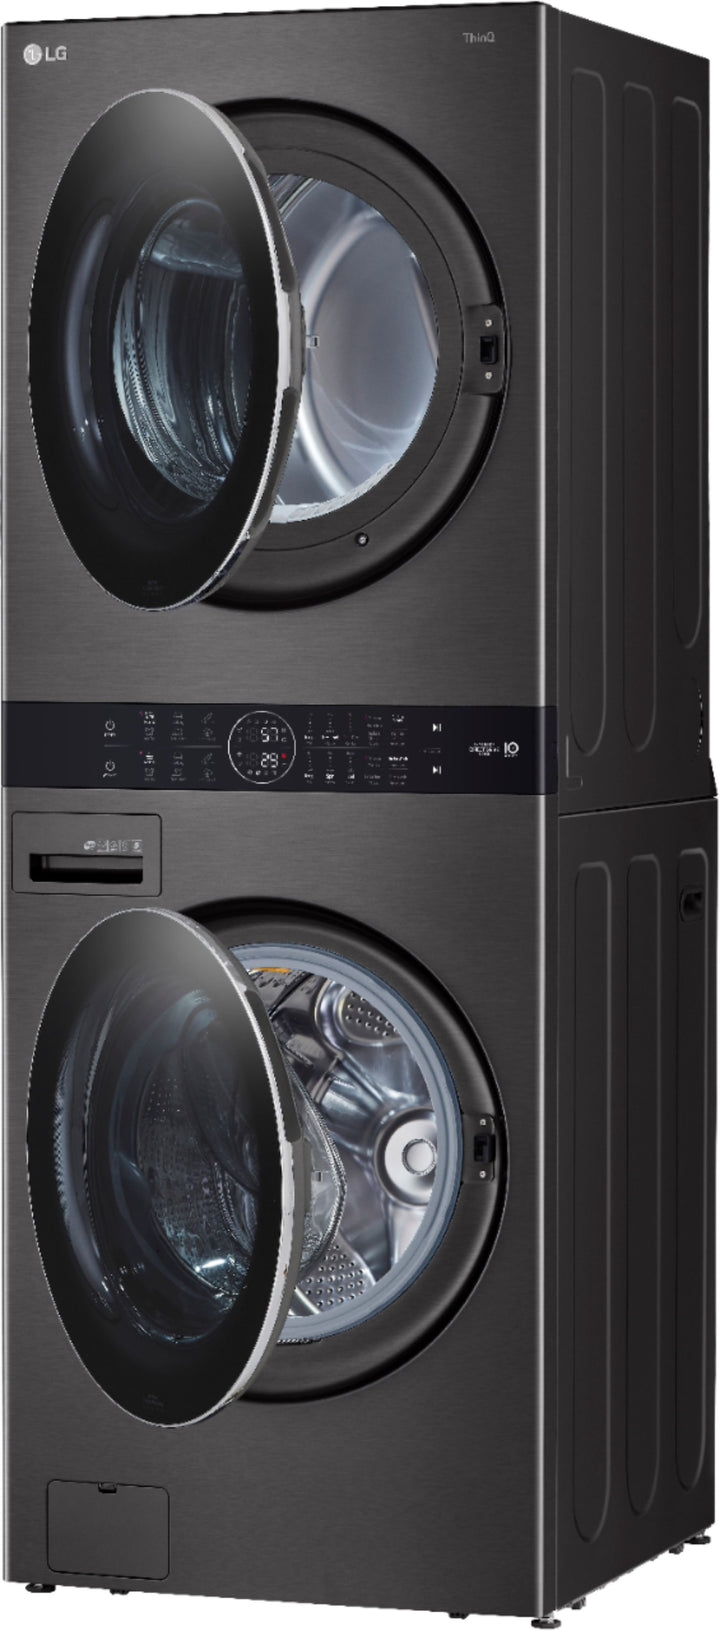 LG - 4.5 Cu. Ft. HE Smart Front Load Washer and 7.4 Cu. Ft. Electric Dryer WashTower with Steam and Built-In Intelligence - Black steel_8